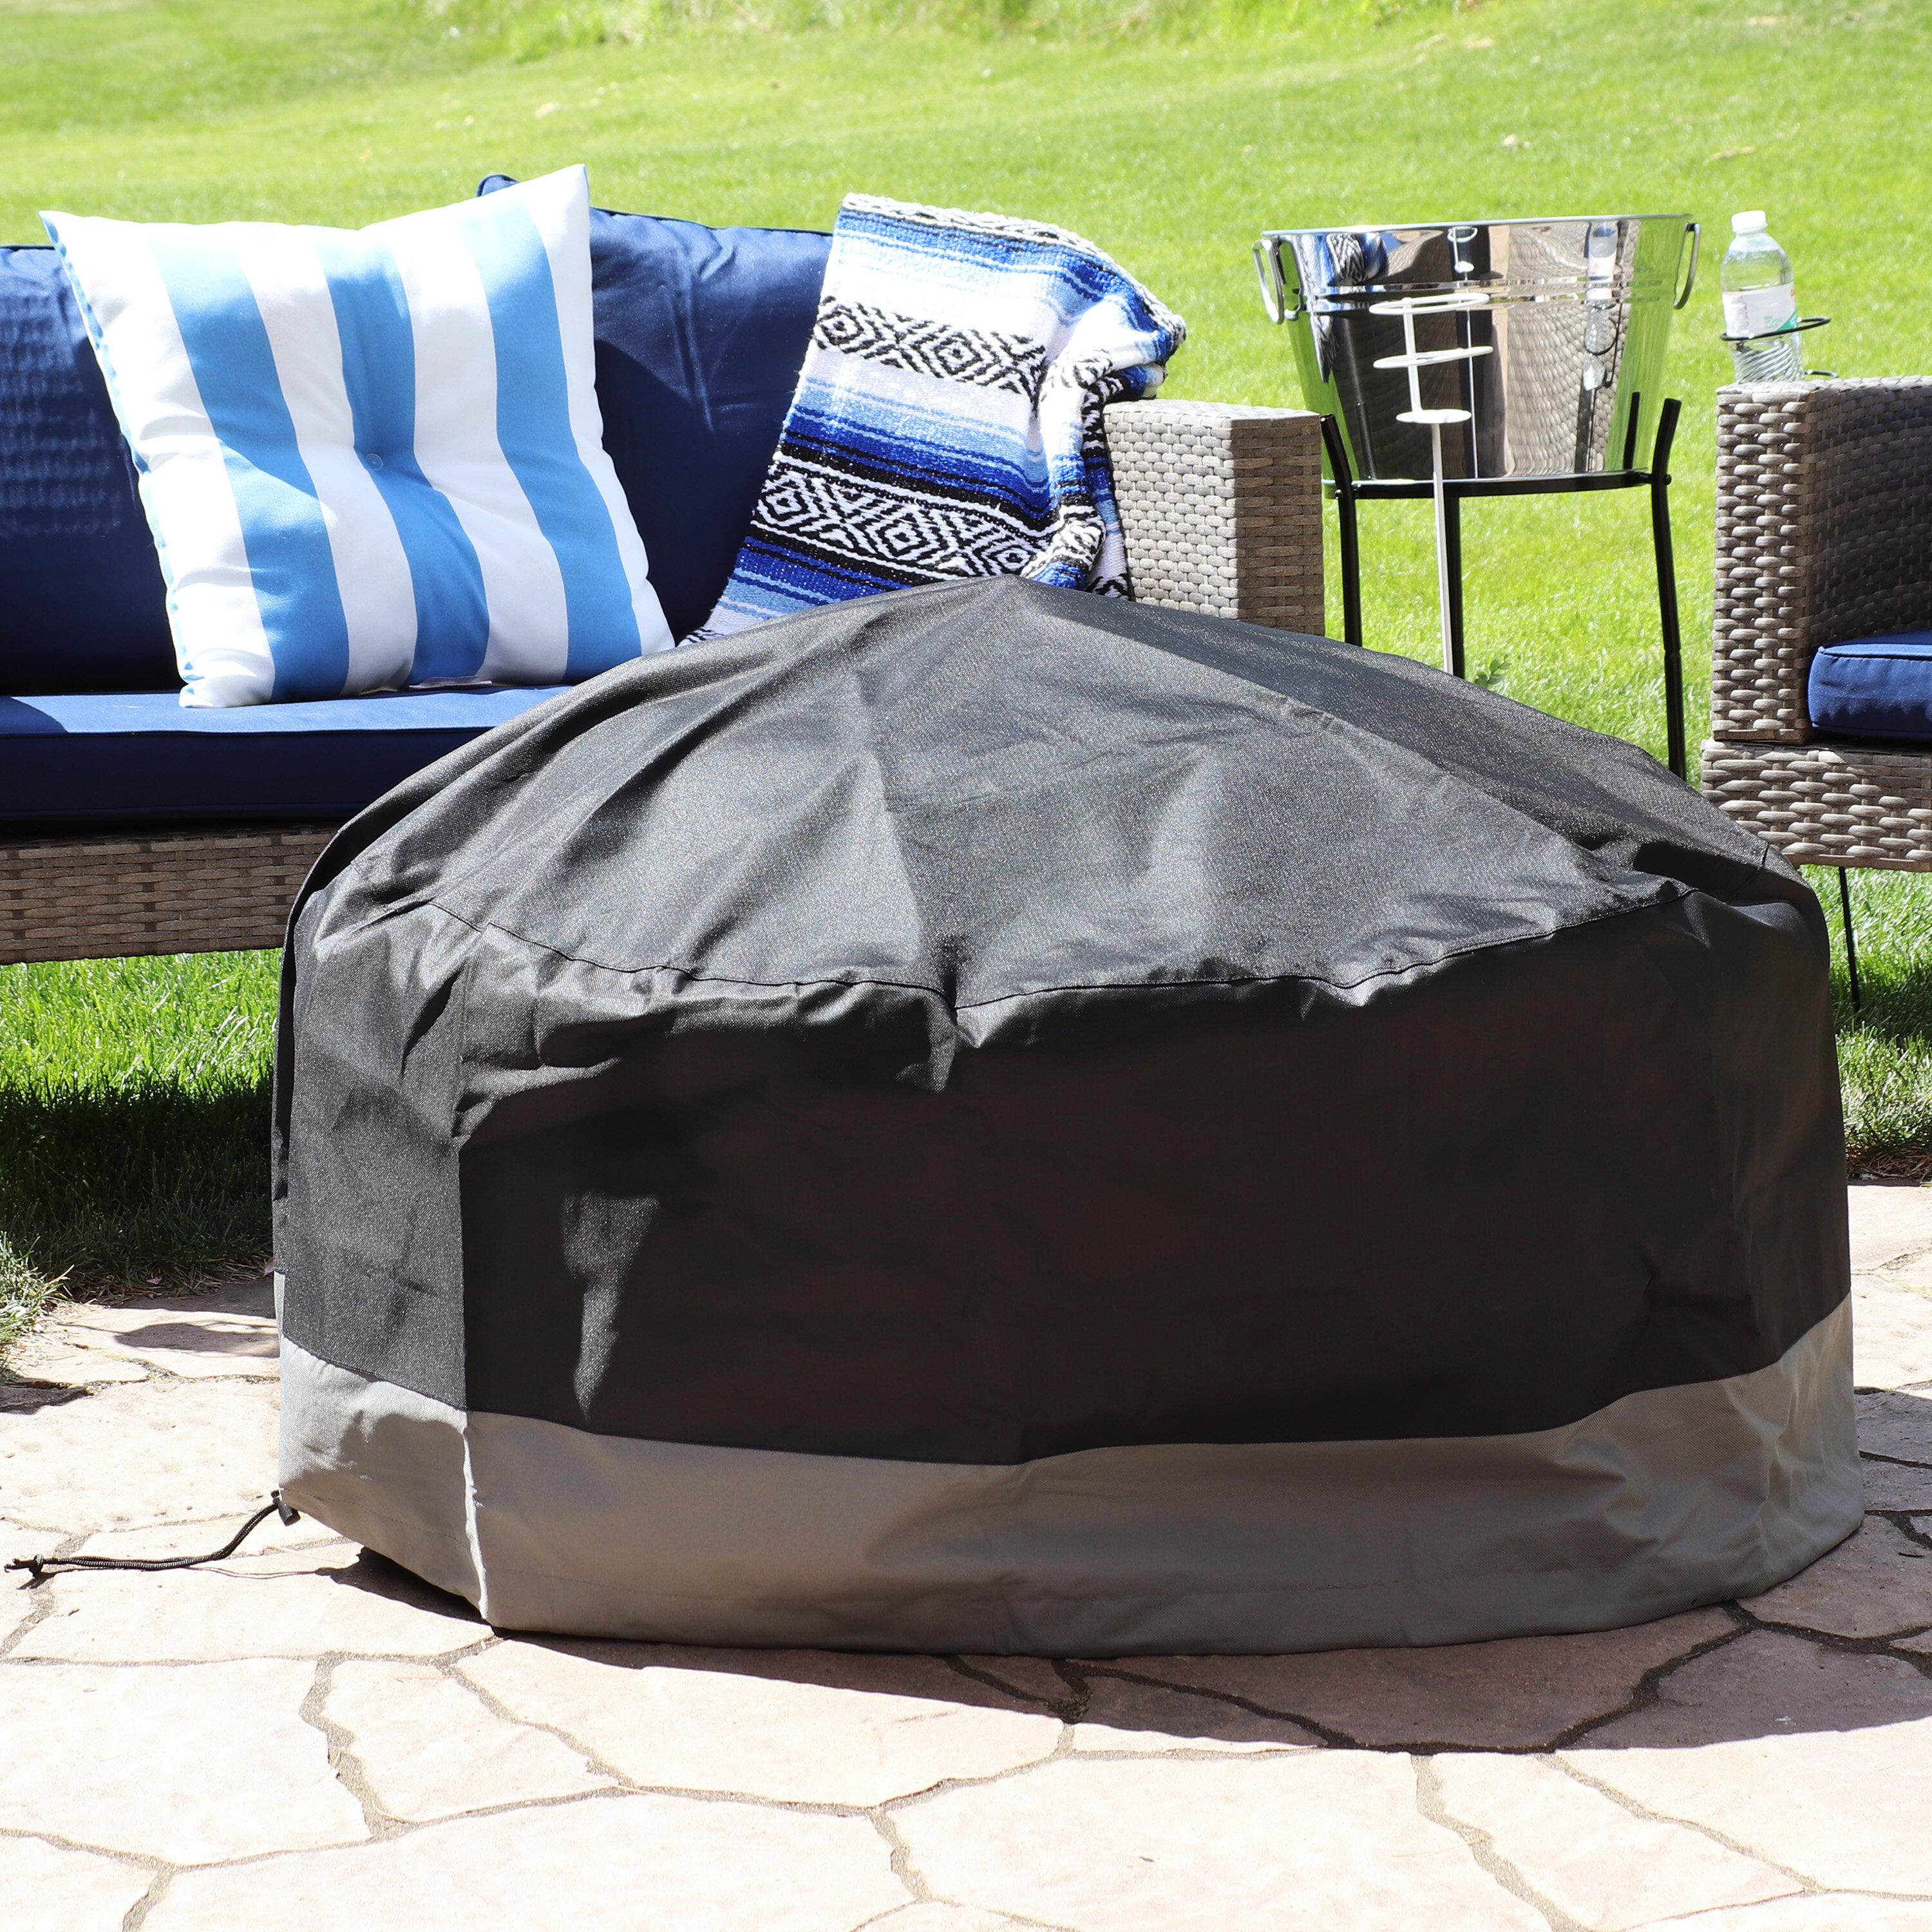 Arlmont Co Jordan Fire Pit Cover Fits Up To 40 Wayfair